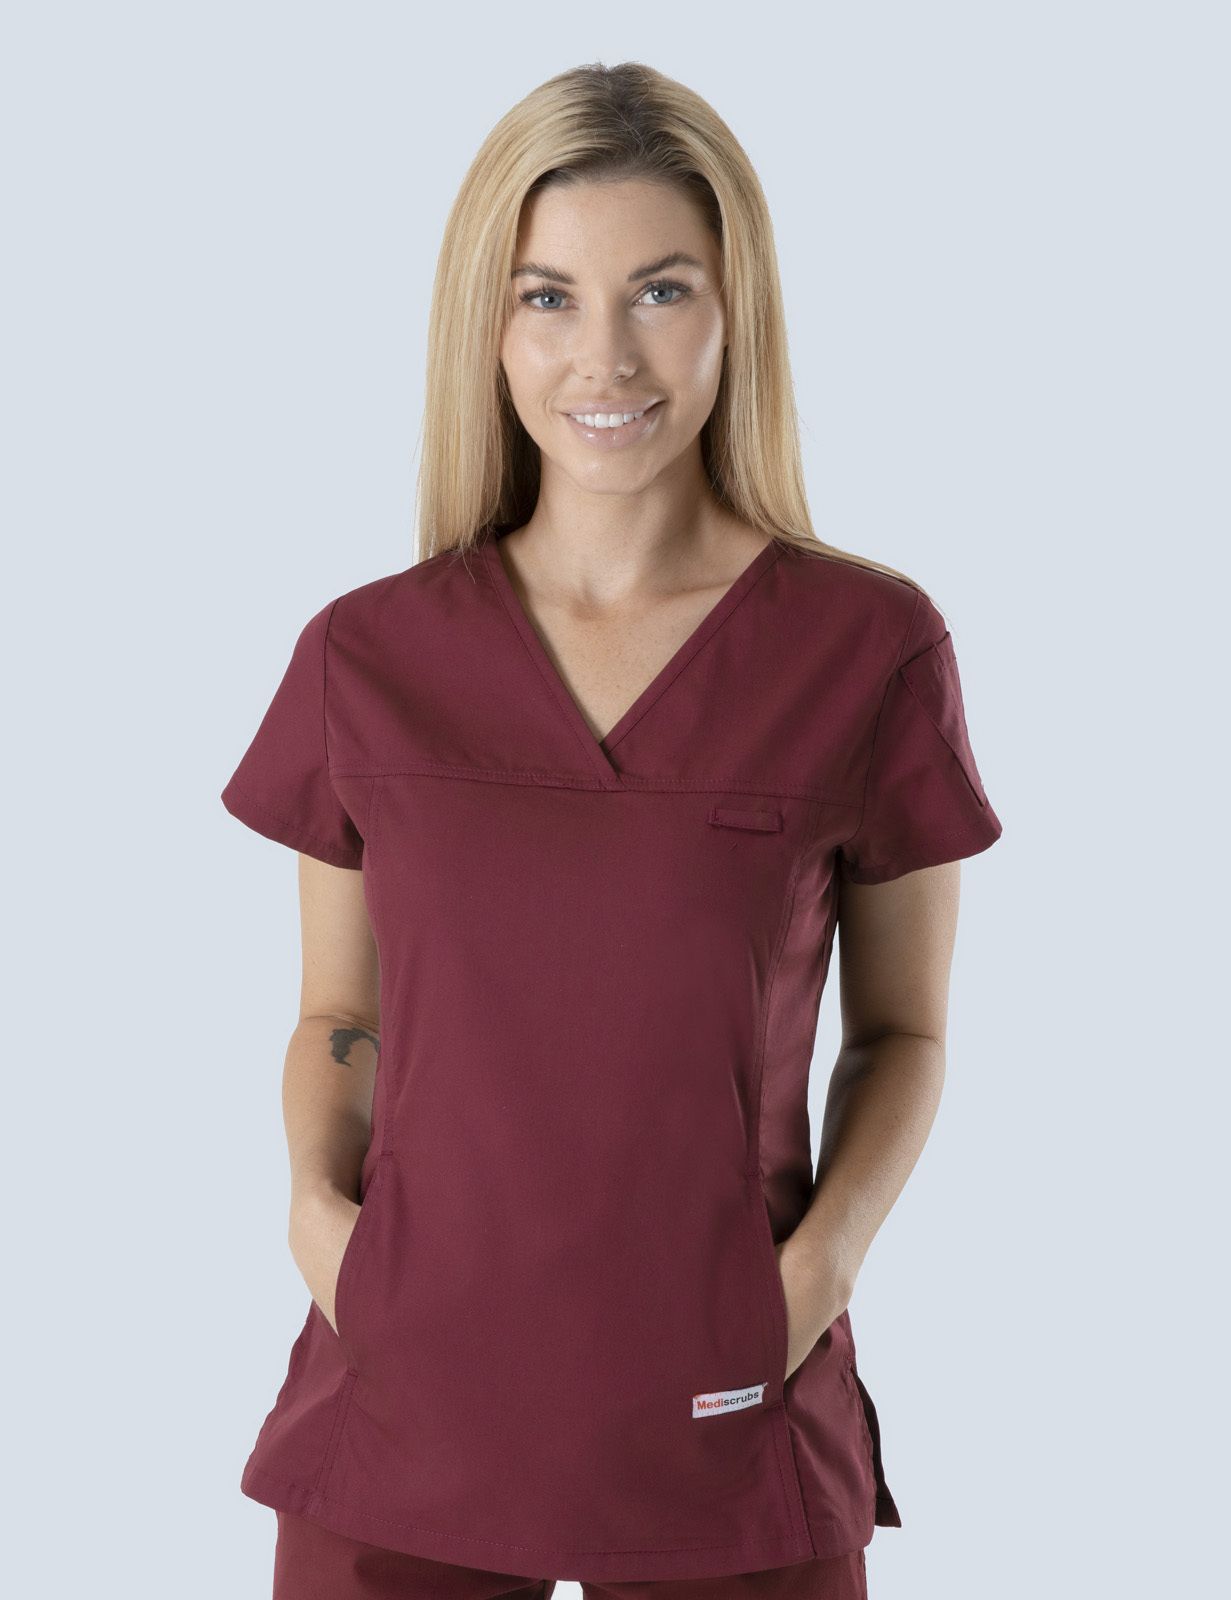 Women's Fit Solid Scrub Top - Burgundy - Small